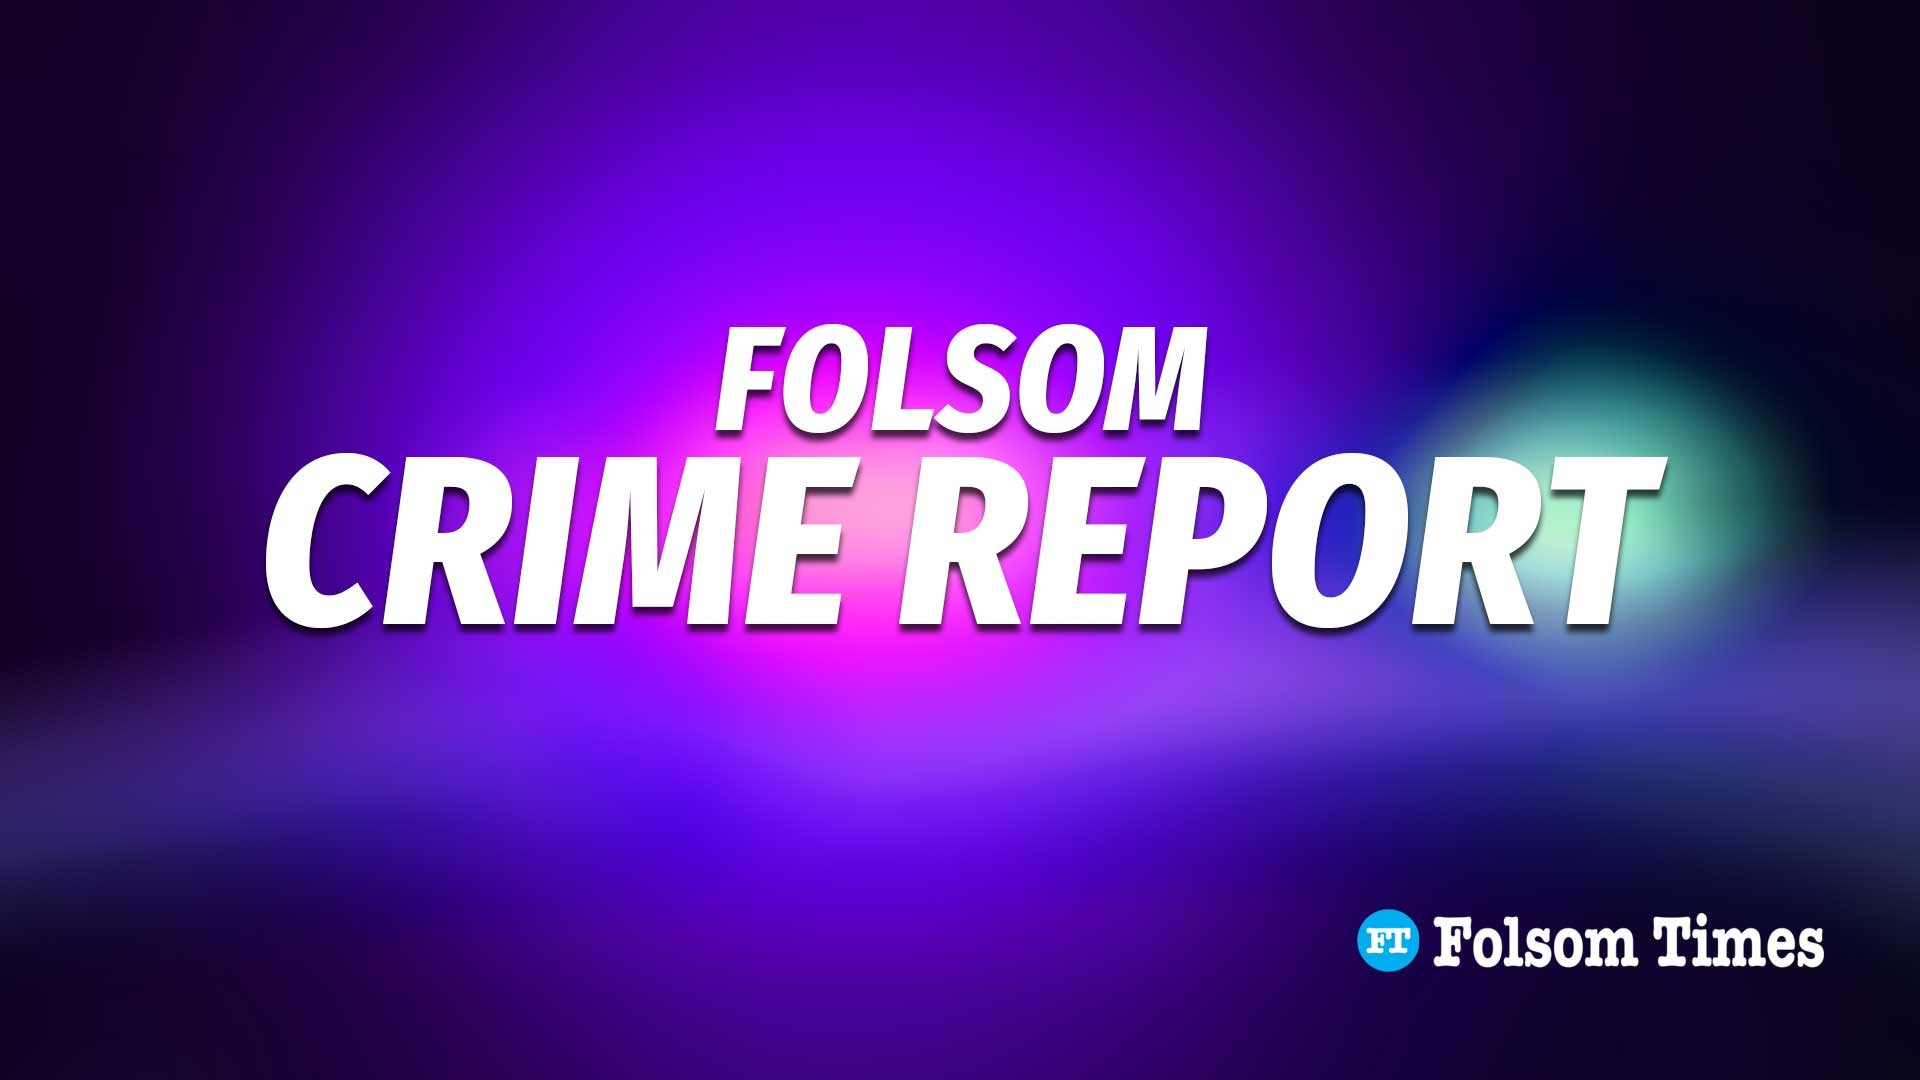 Illegal firearms, child endangerment, retail theft top latest Folsom crime reports